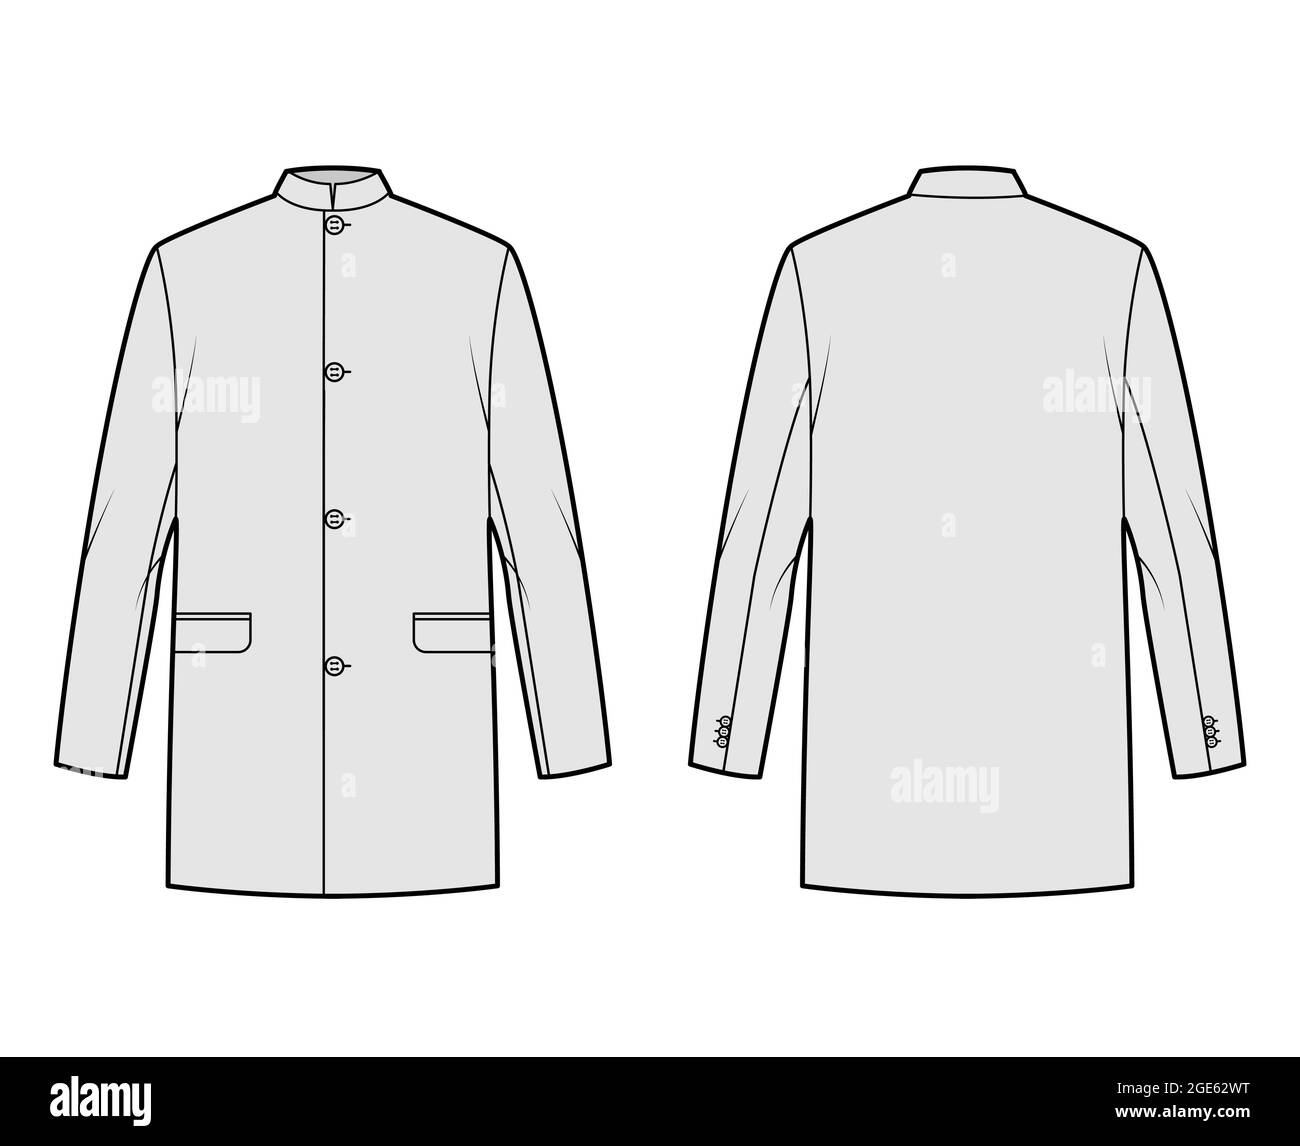 Nehru jacket technical fashion illustration with oversized, stand collar, flap pockets, oversized, long sleeves. Flat coat apparel template front, back, grey color style. Women, men, unisex CAD mockup Stock Vector